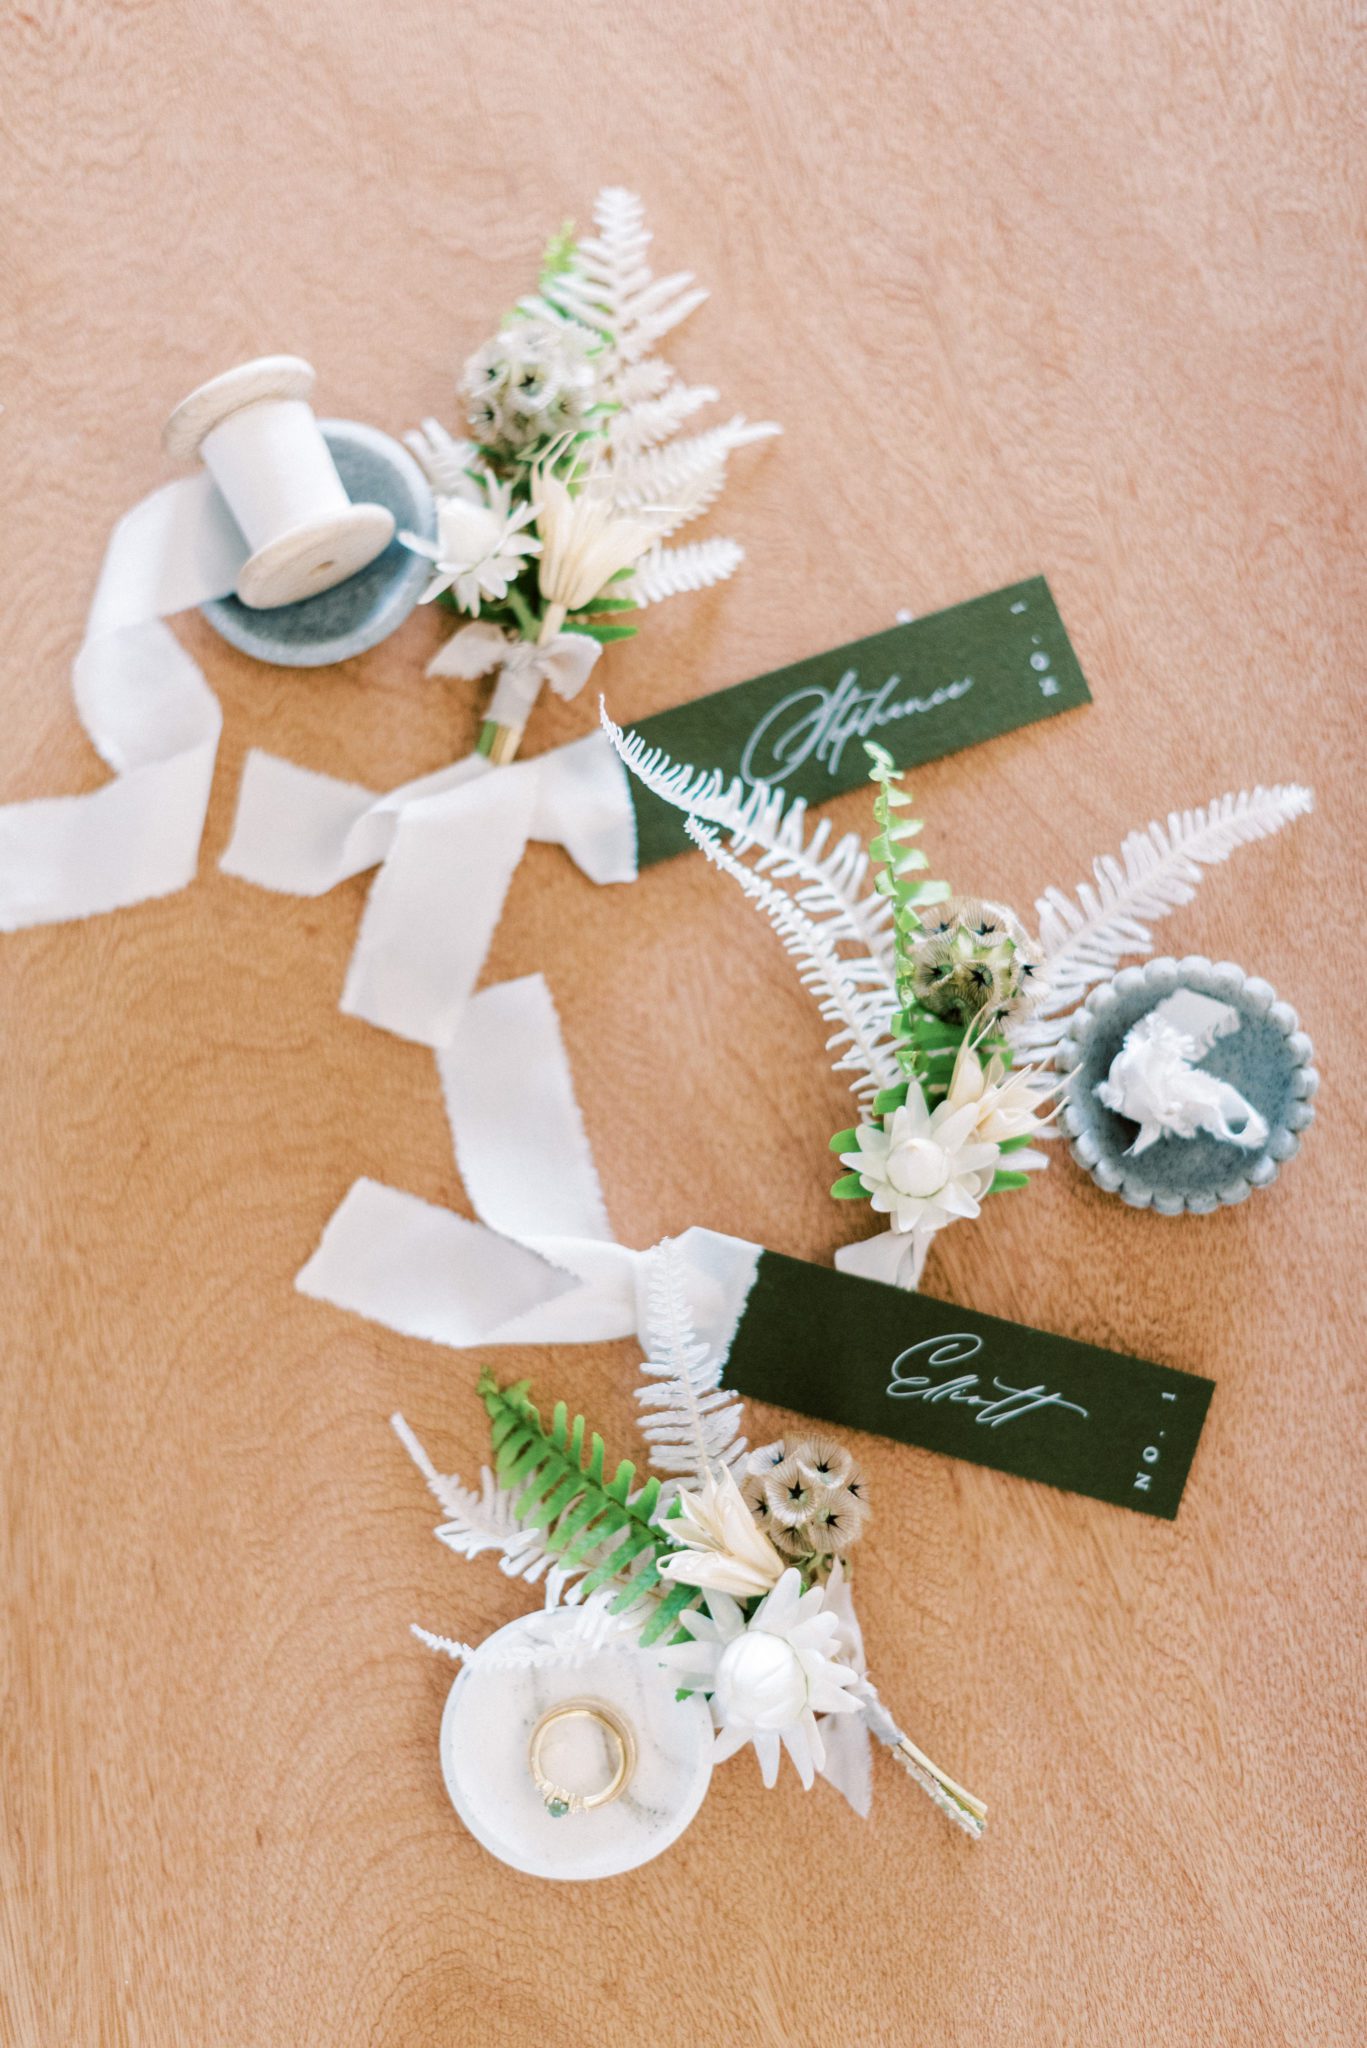 Olive place card inspiration